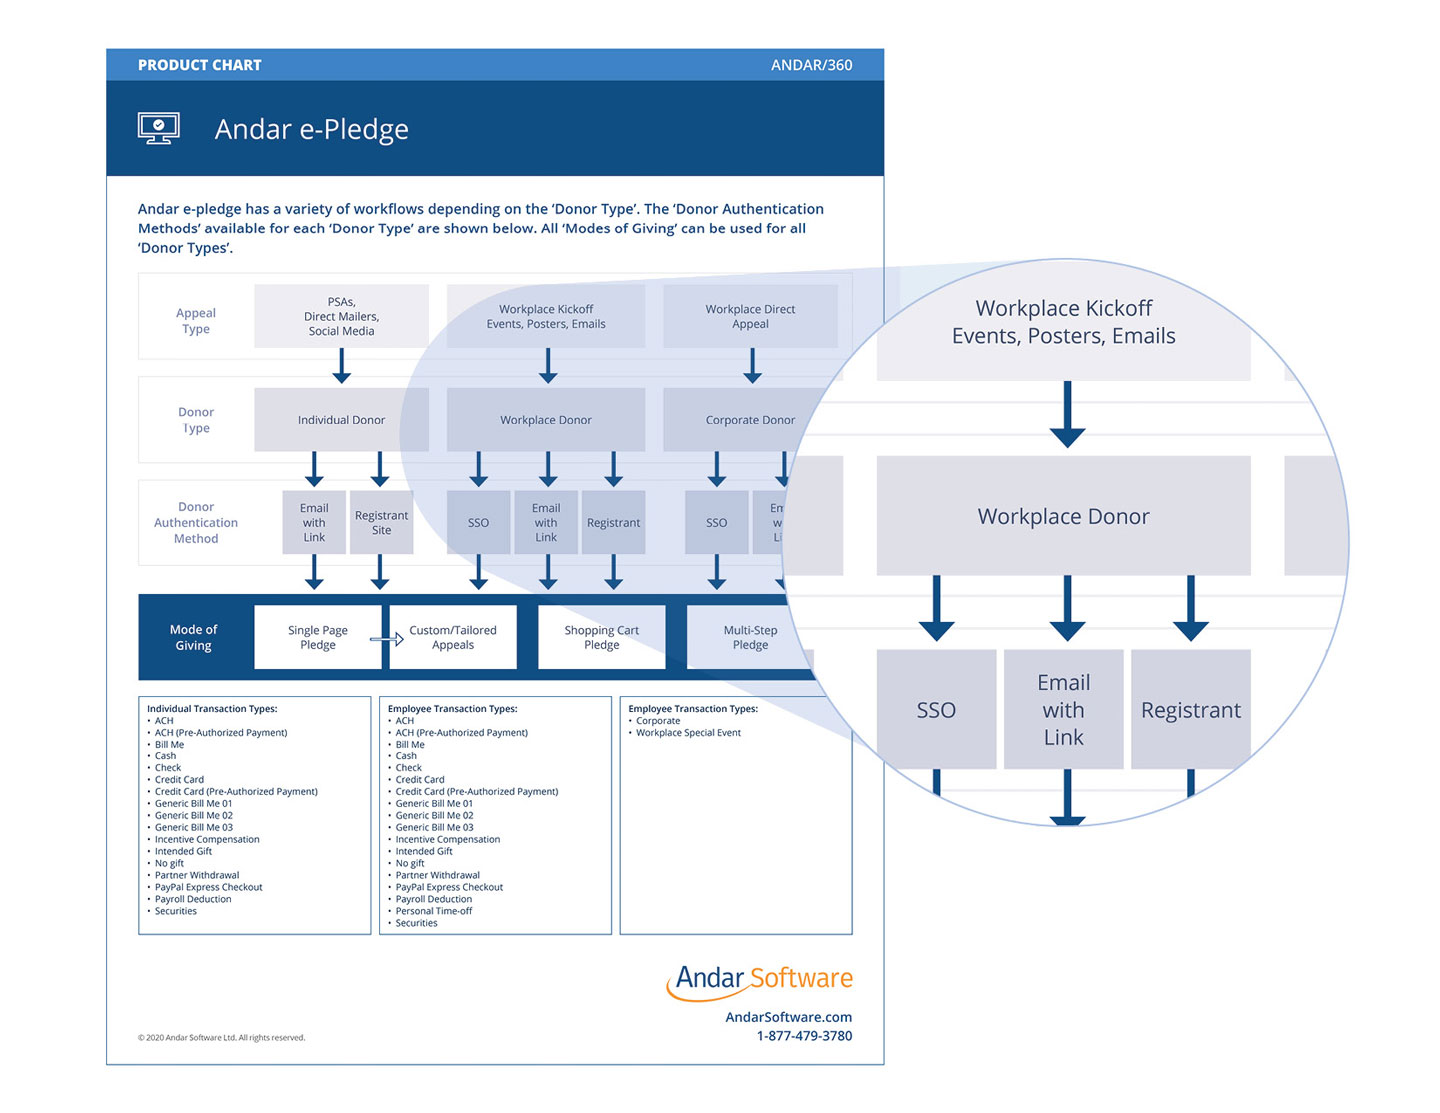 Learn about the different donor types, donor authentication methods and modes of giving available in Andar e-Pledge.